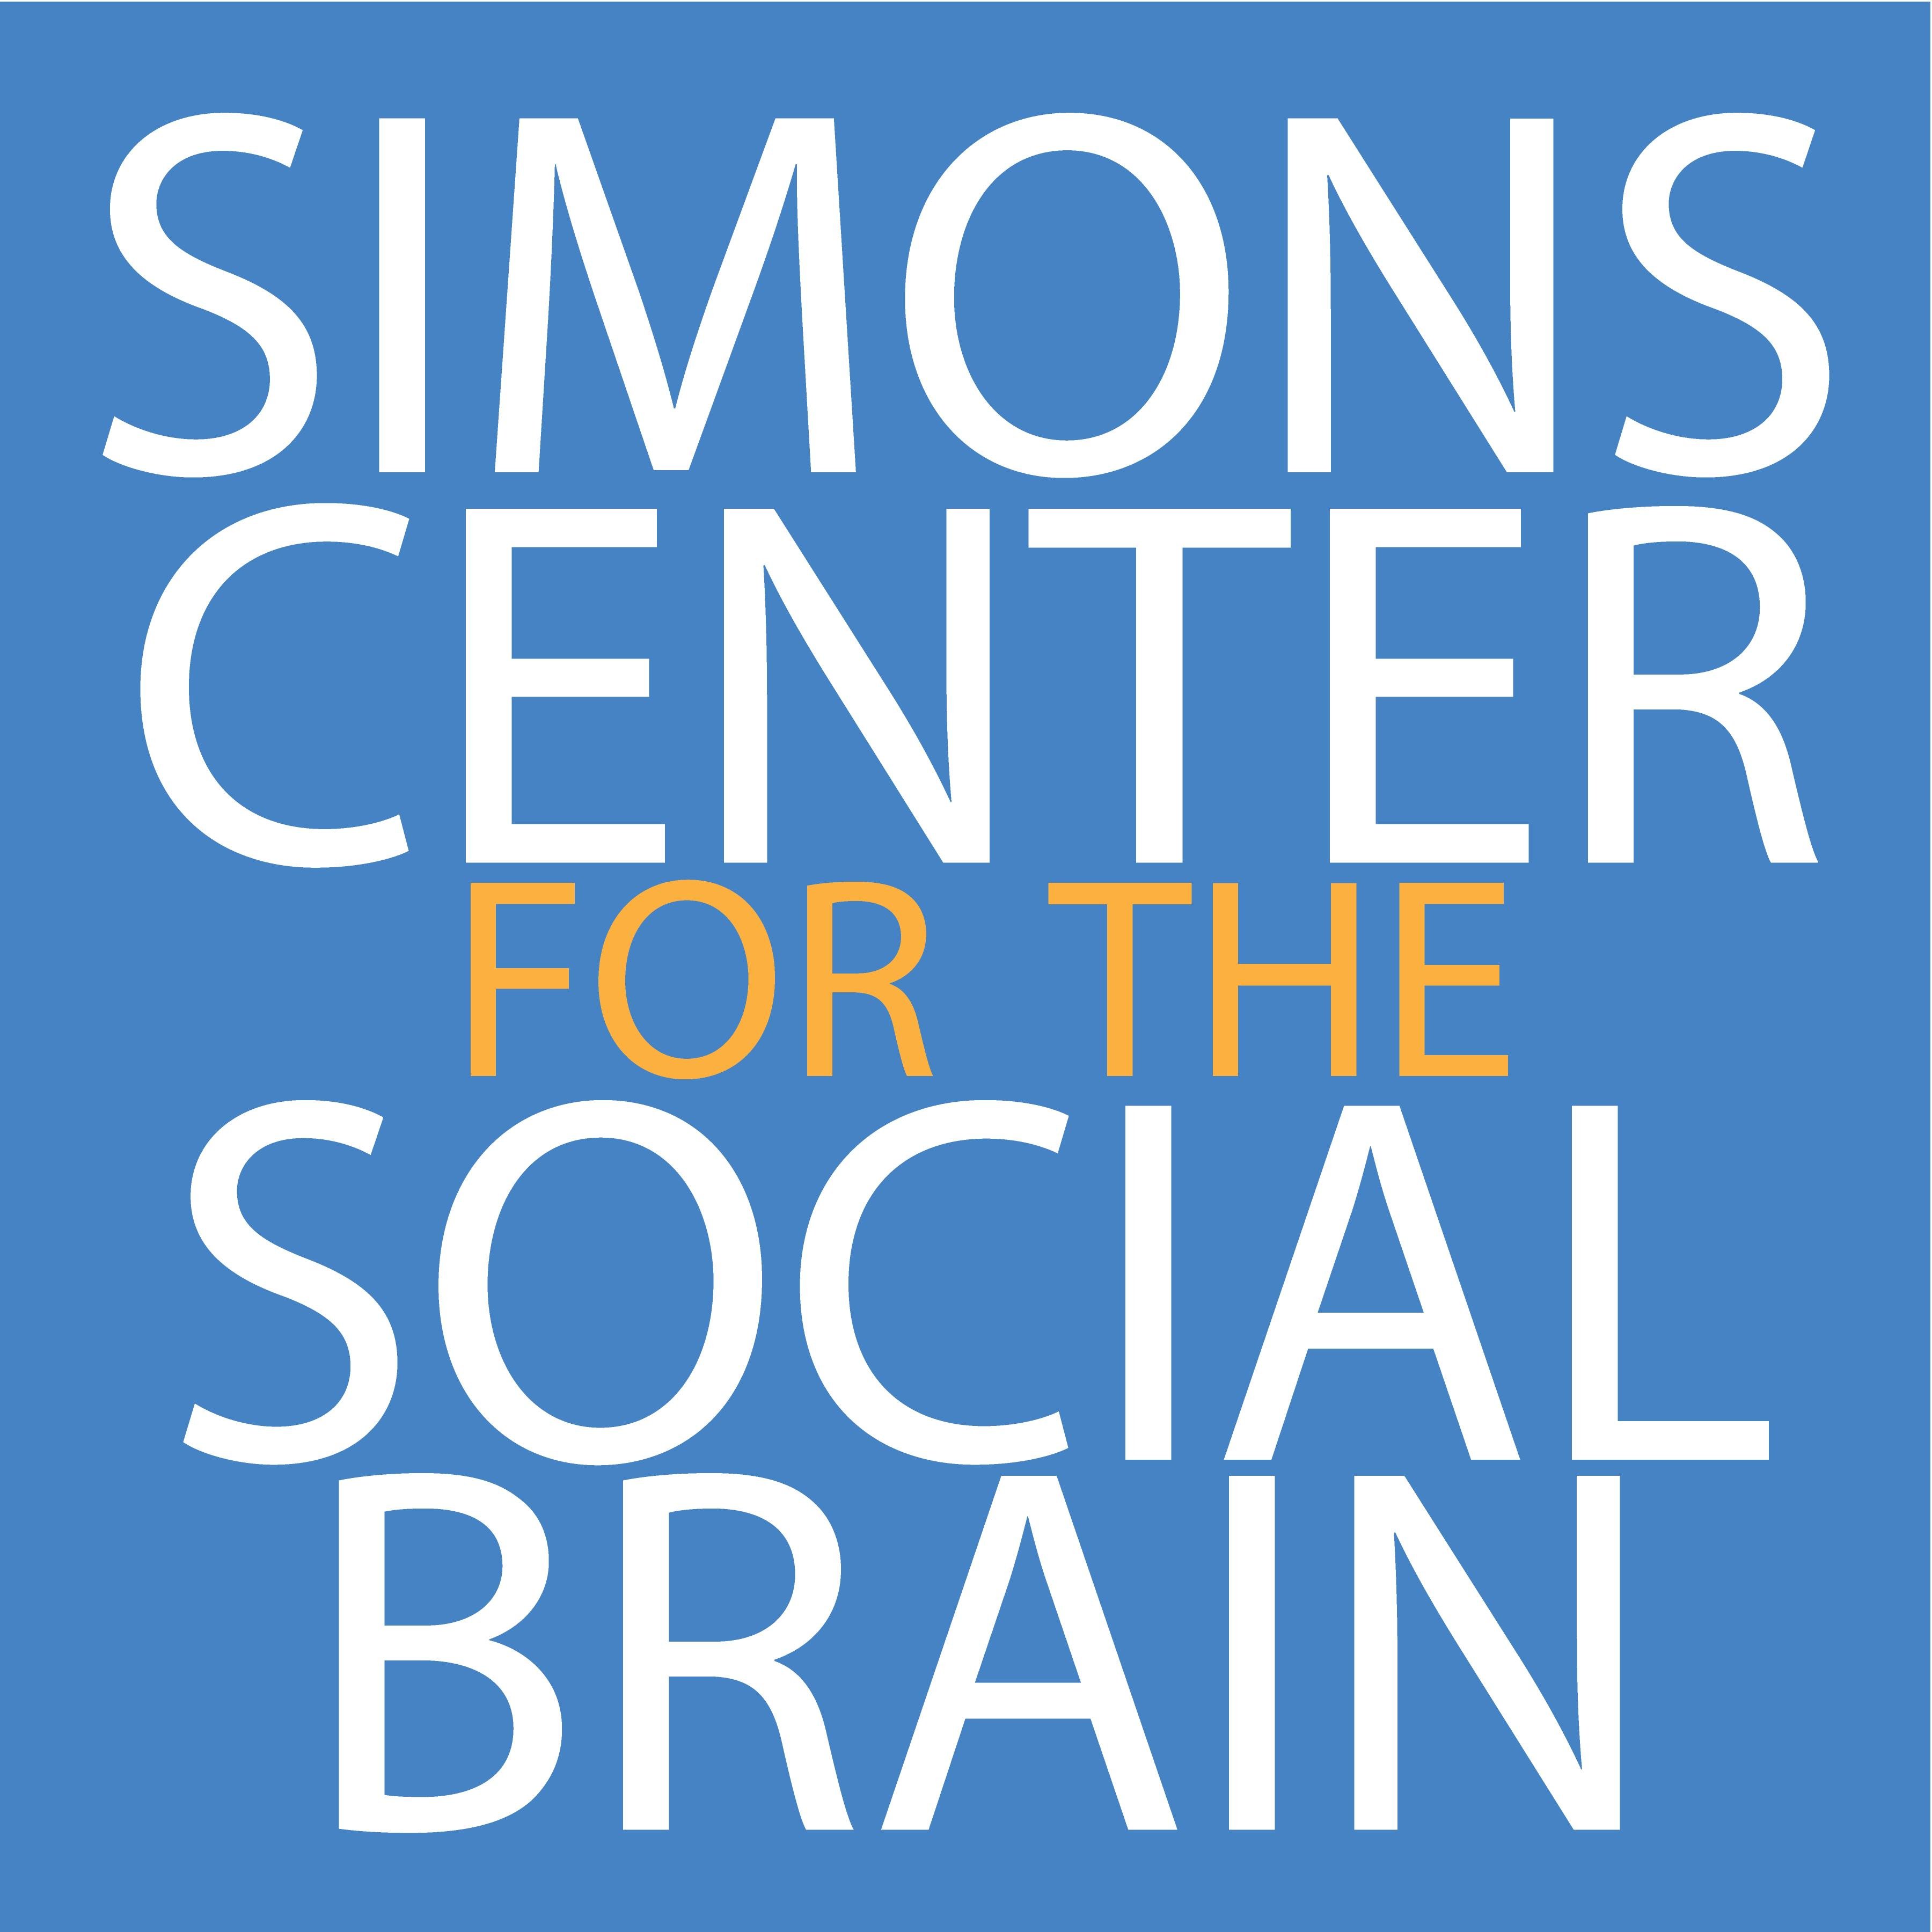 Simons Center for the Social Brain at MIT